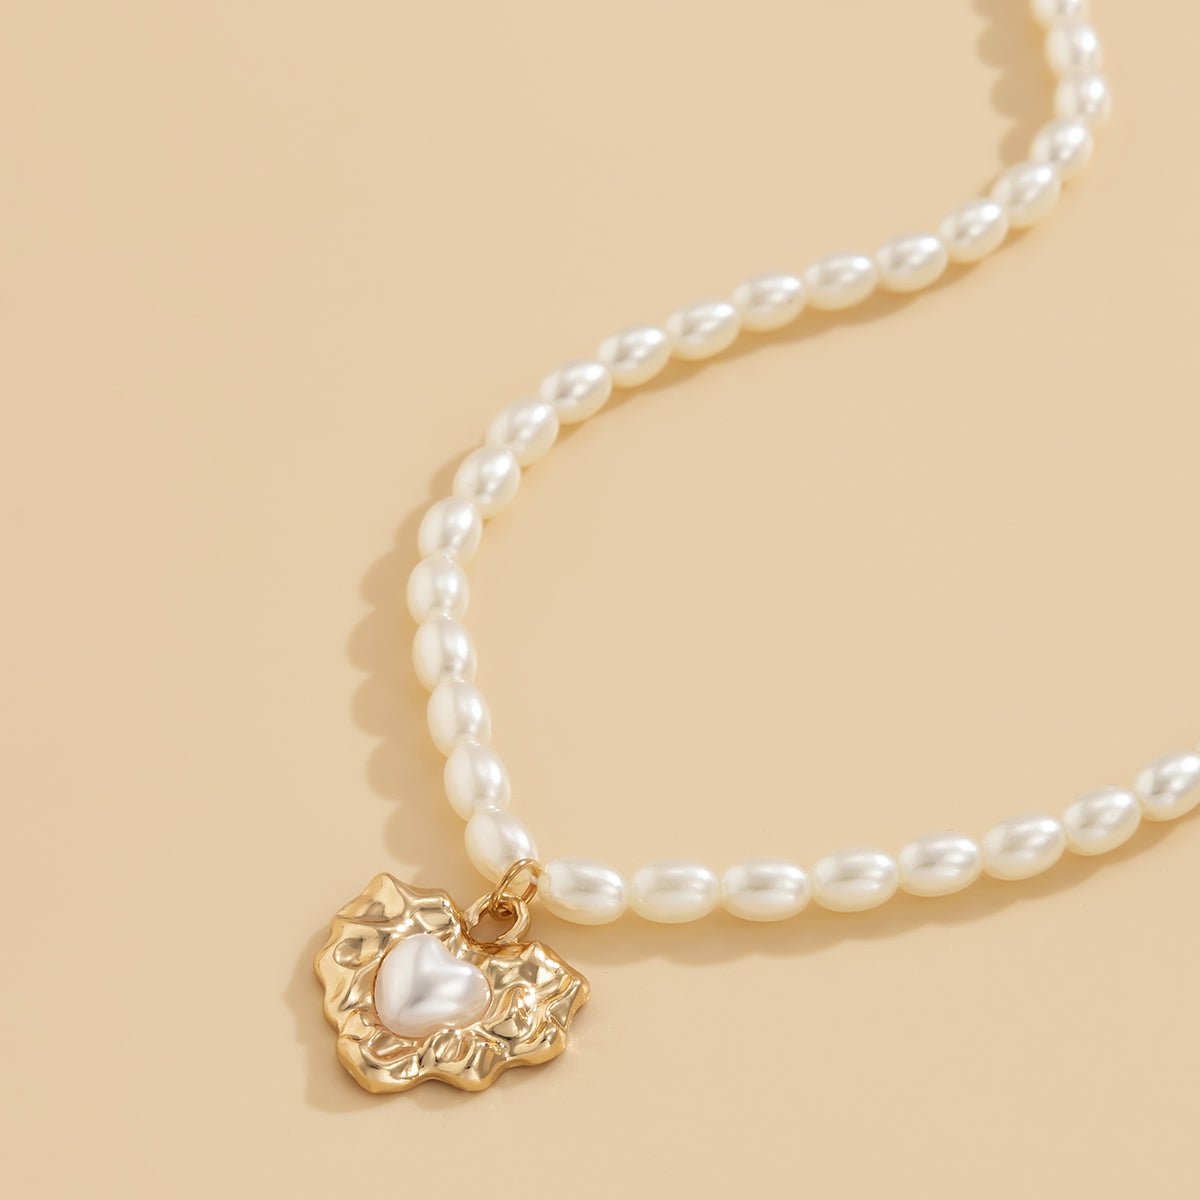 Pearl & 18K Gold-Plated Wrinkled Heart Pendant Necklace